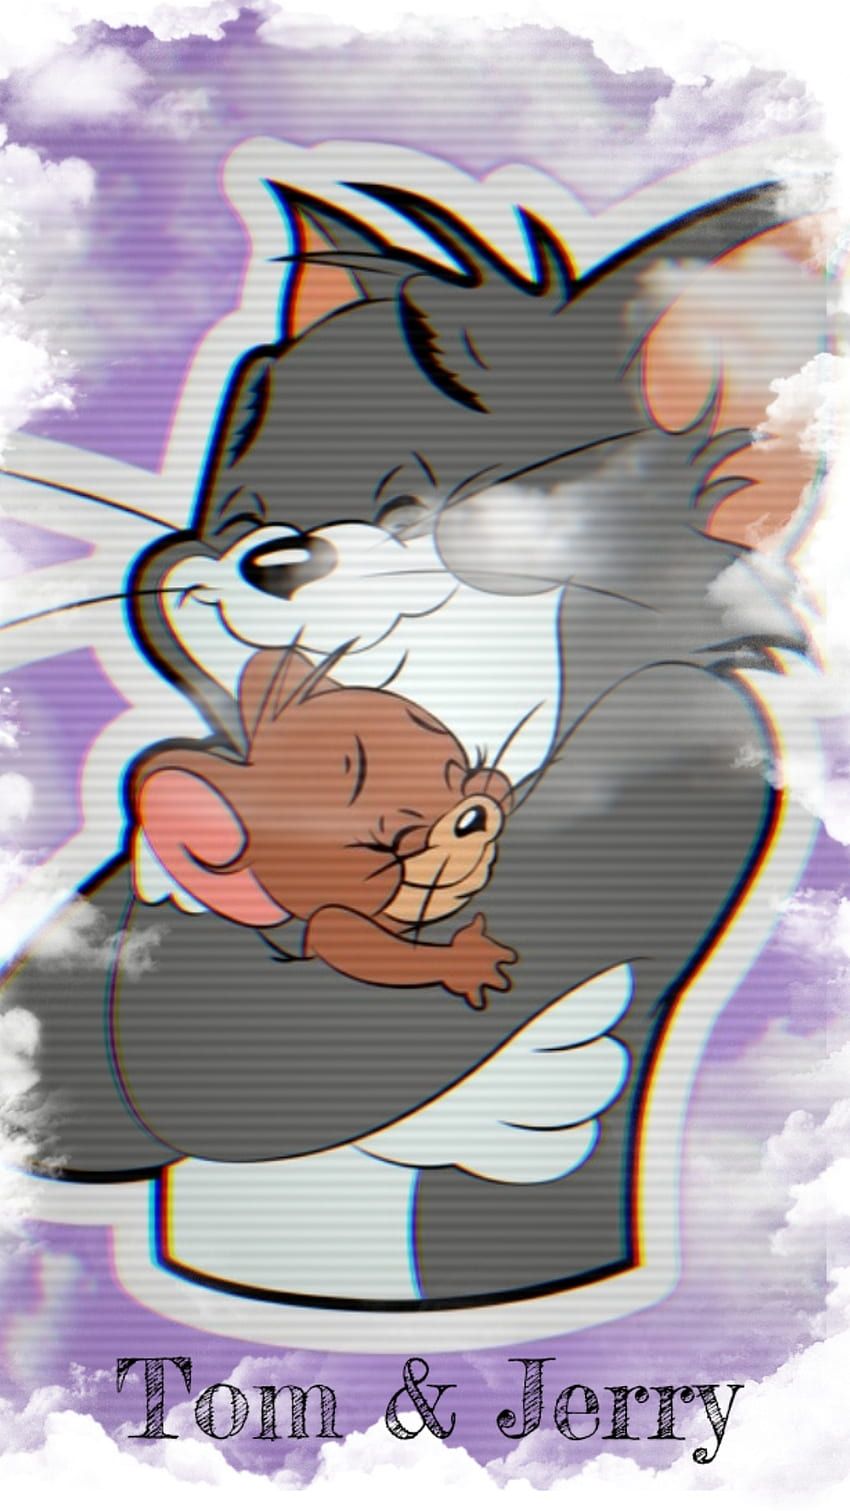 A cartoon cat and mouse holding hands - Tom and Jerry